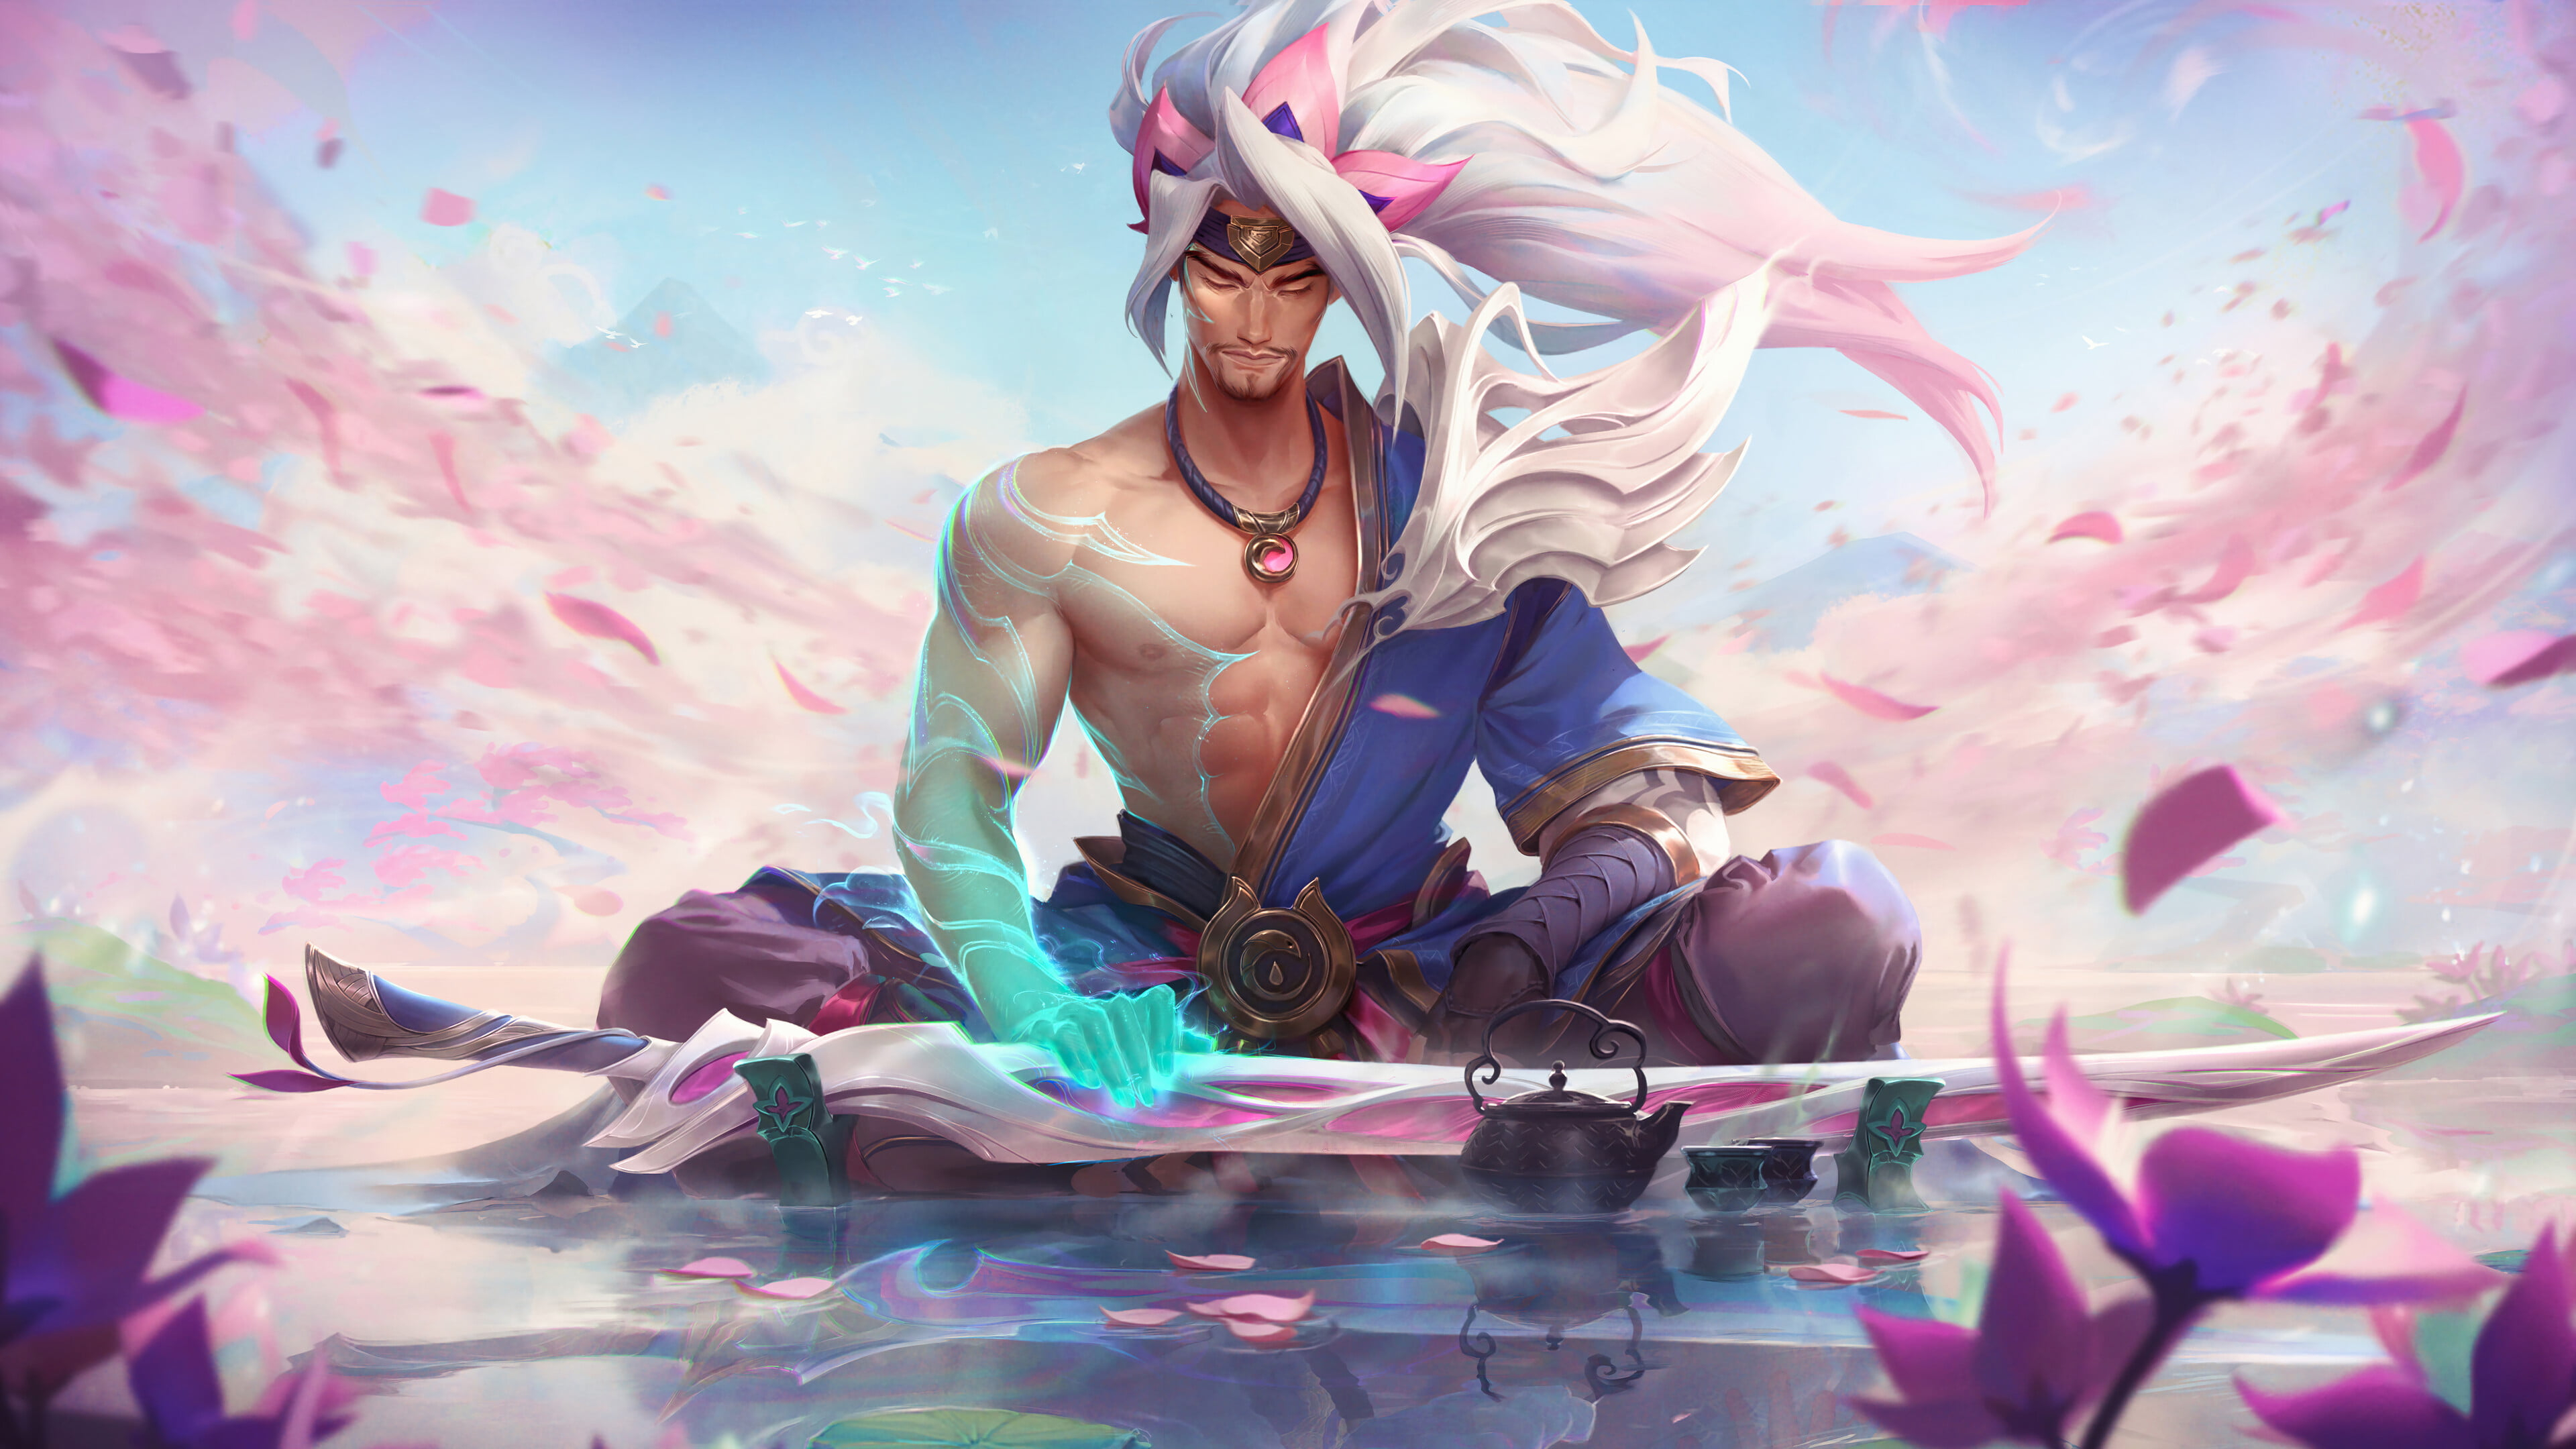 8x3 Yasuo 4k League Of Legends 8x3 Resolution Wallpaper Hd Games 4k Wallpapers Images Photos And Background